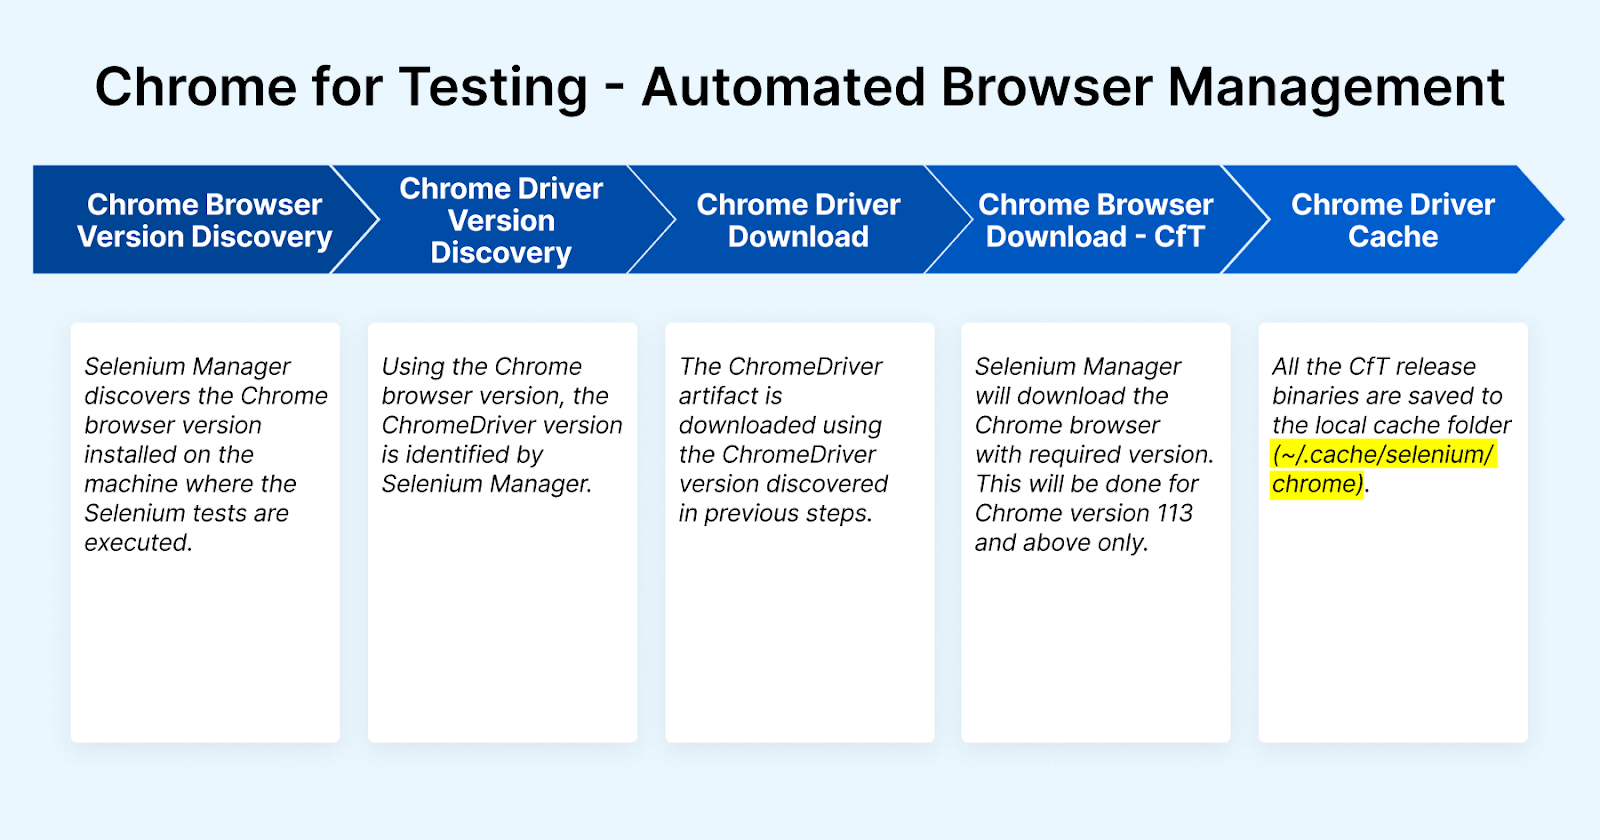 Automated Browser Management